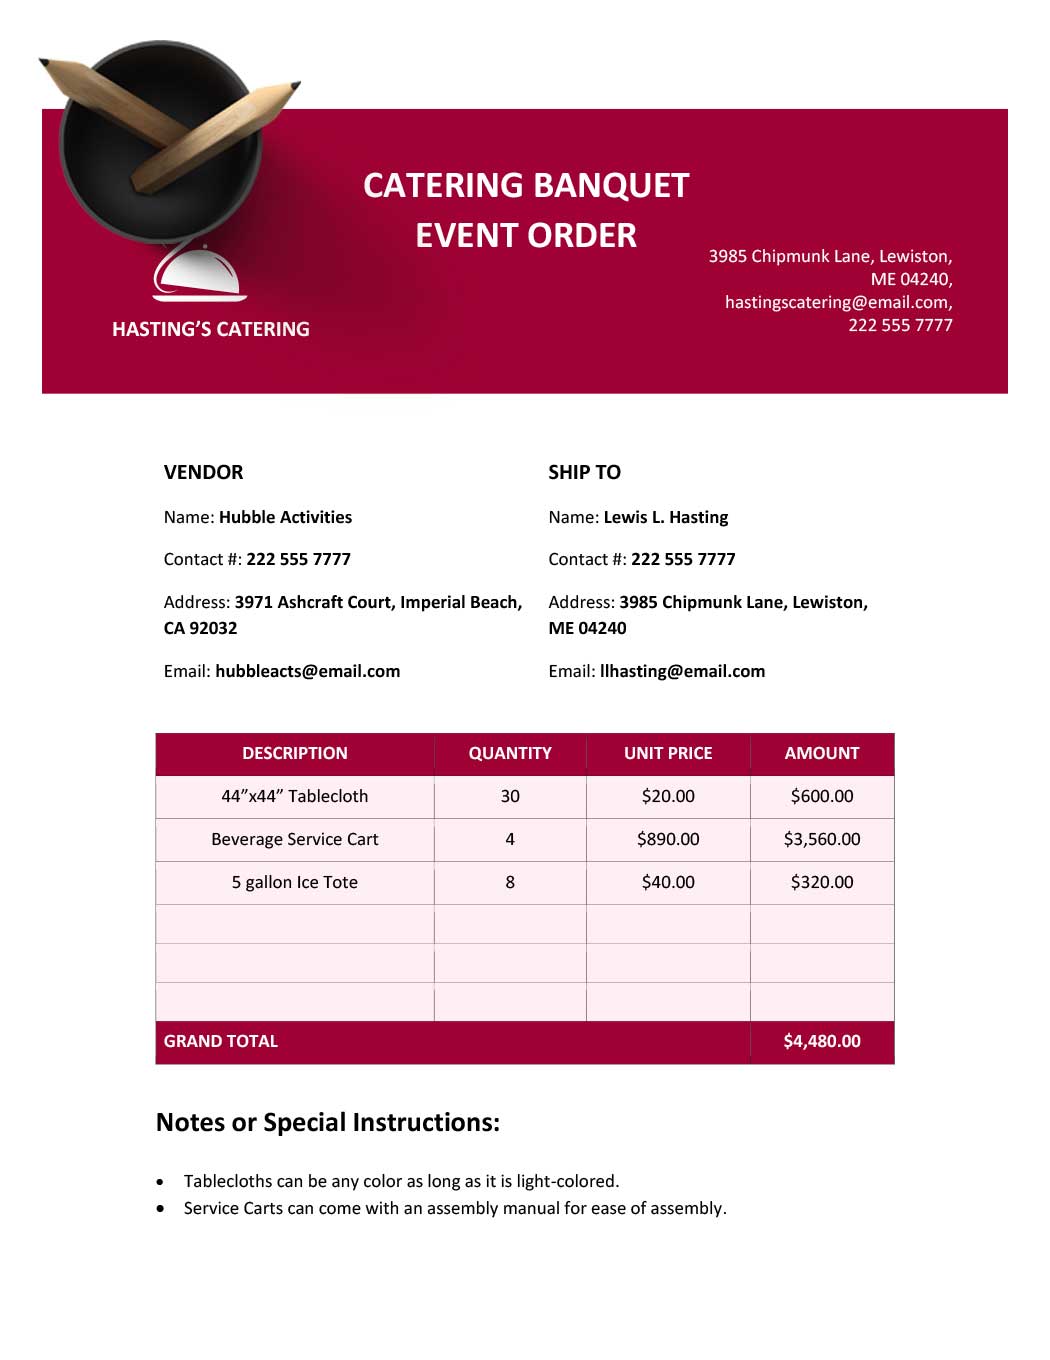 Catering Banquet Event Order Template Download in Word, Google Docs